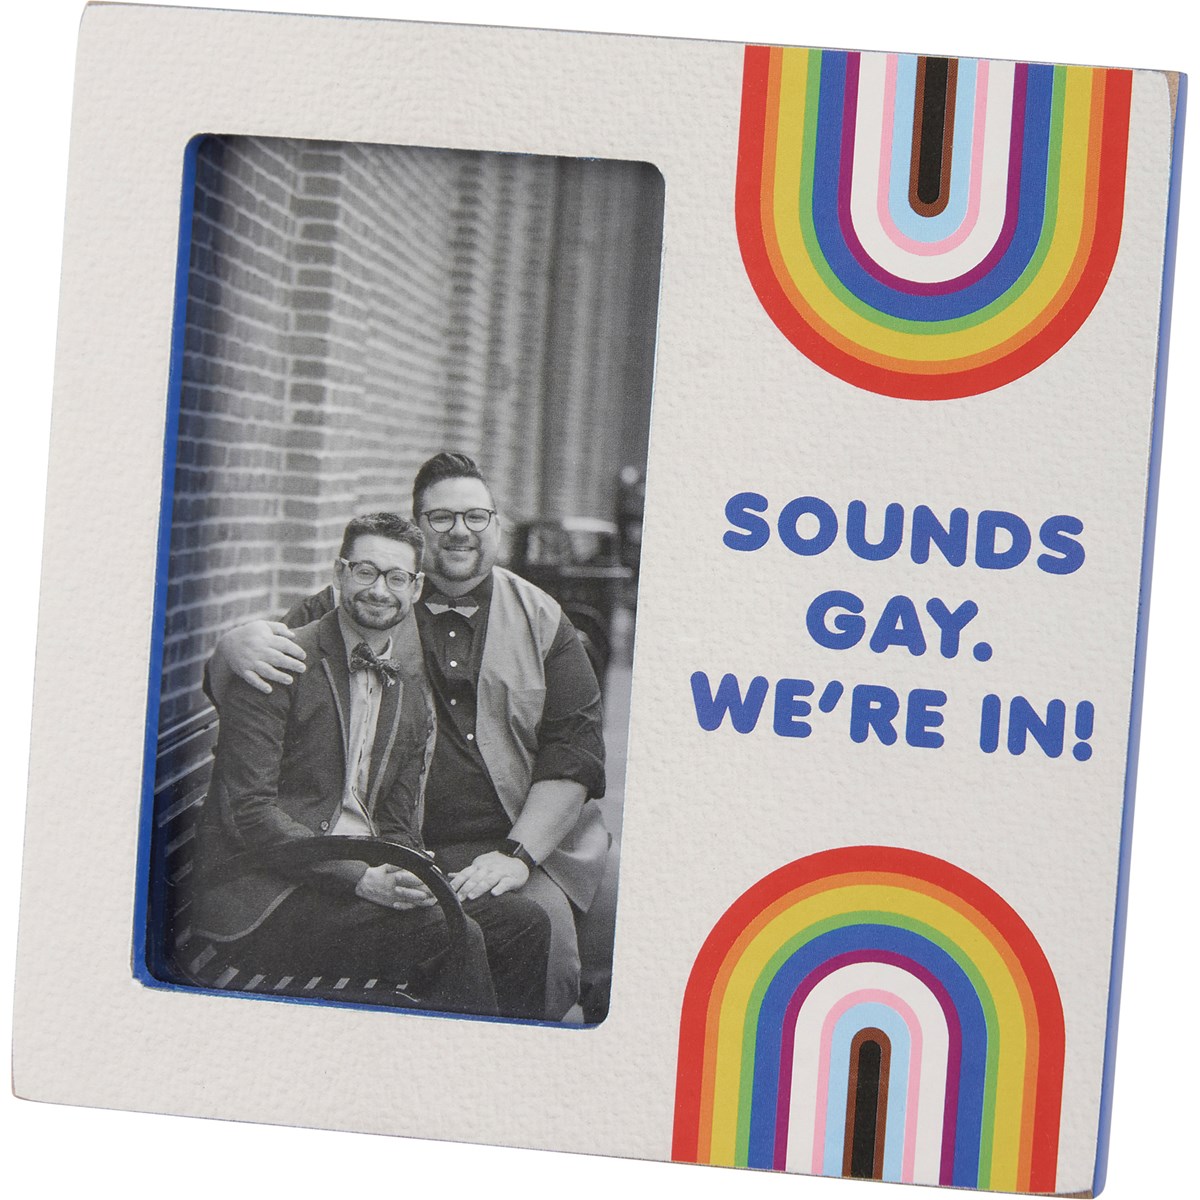 Plaque Frame - Sounds Gay We're In - 6" x 6" x 0.50", Fits 3" x 5" Photo - Wood, Paper, Glass, Metal